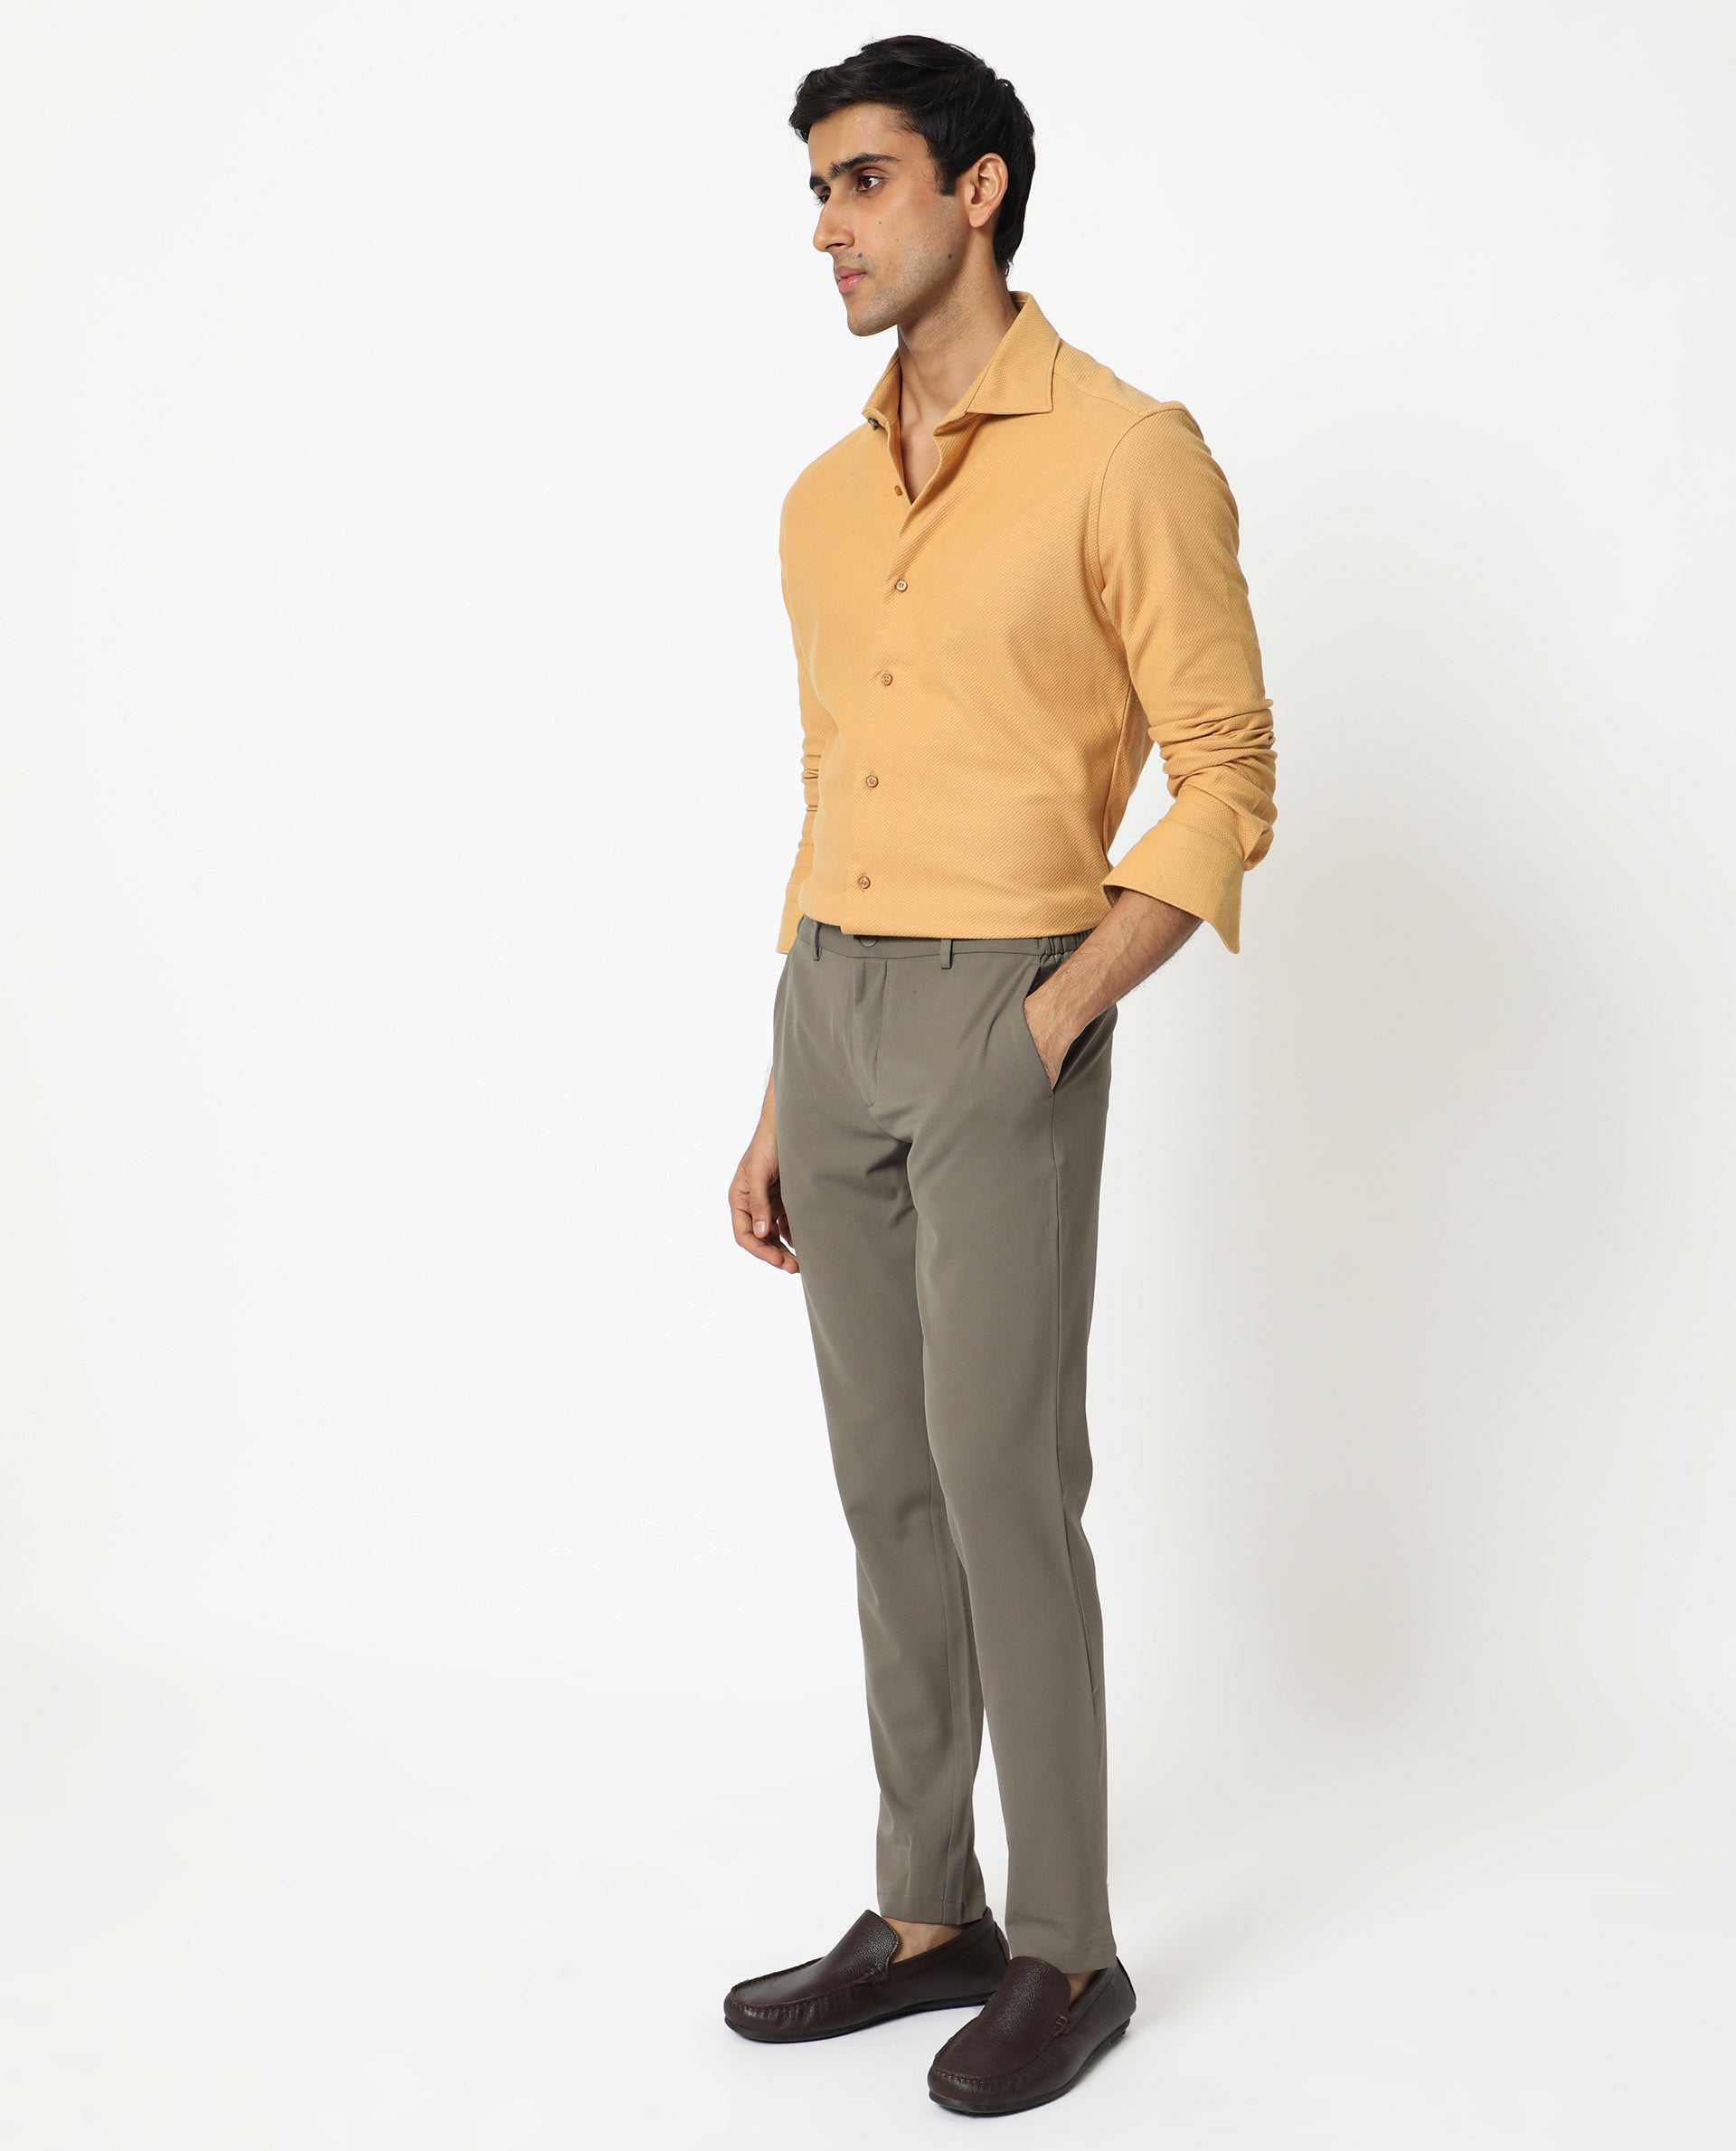 For a yellow formal shirt, which trousers I can wear? - Quora